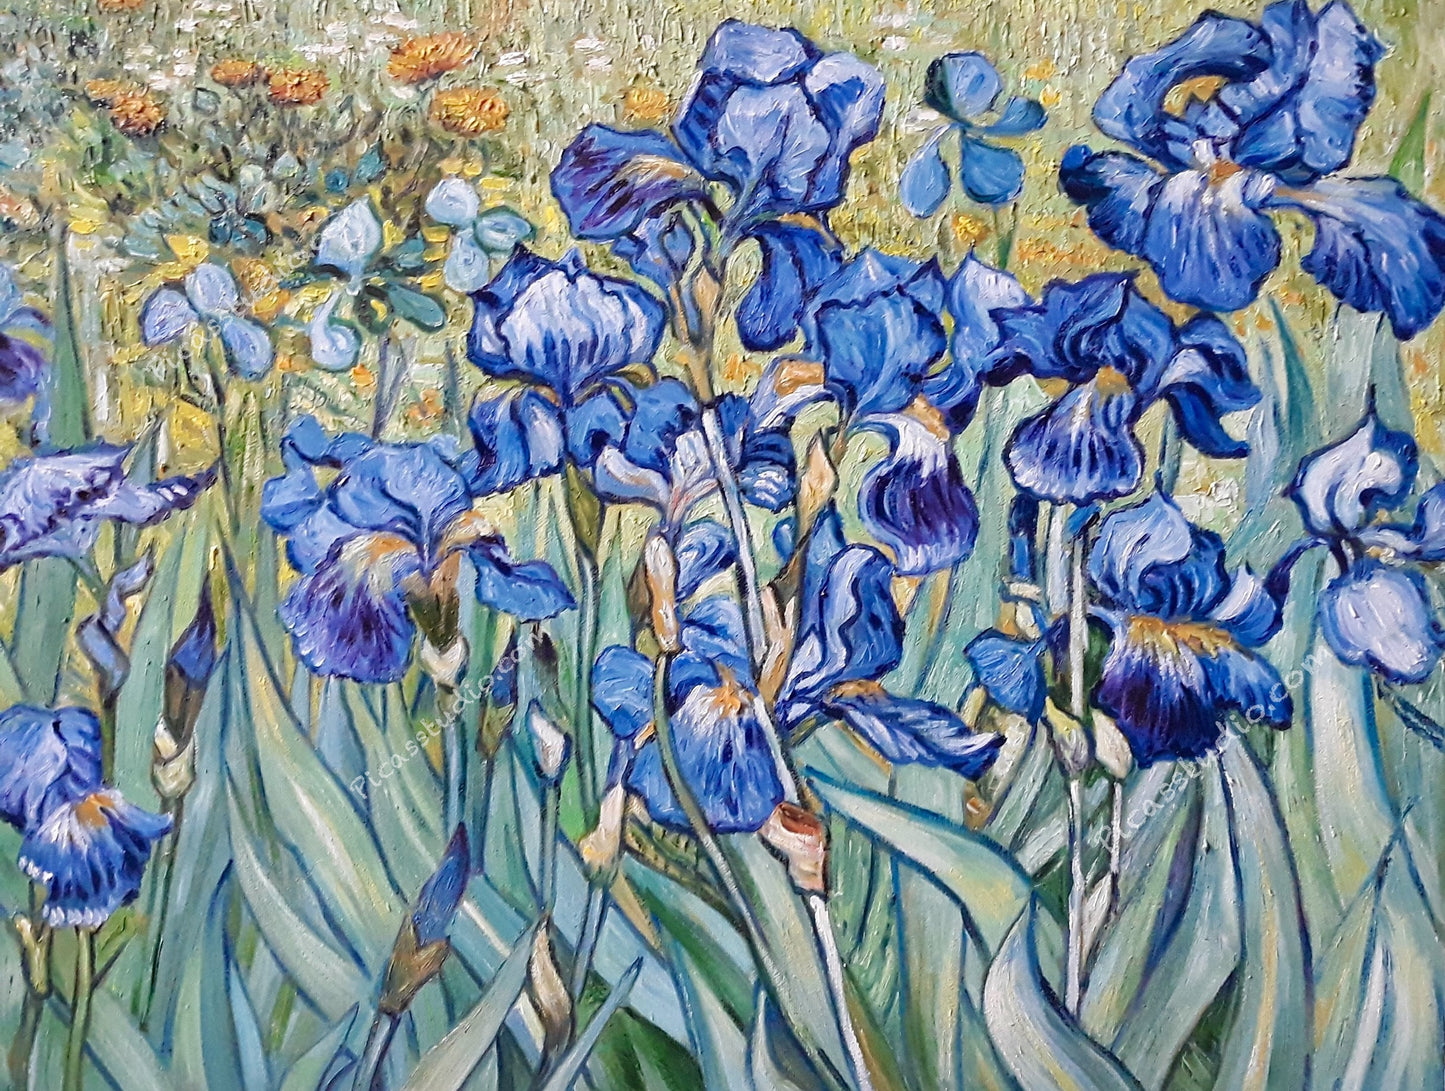 Vincent van Gogh Oil Painting Irises Flowers Hand Painted Art on Canvas Wall Decor Unframed